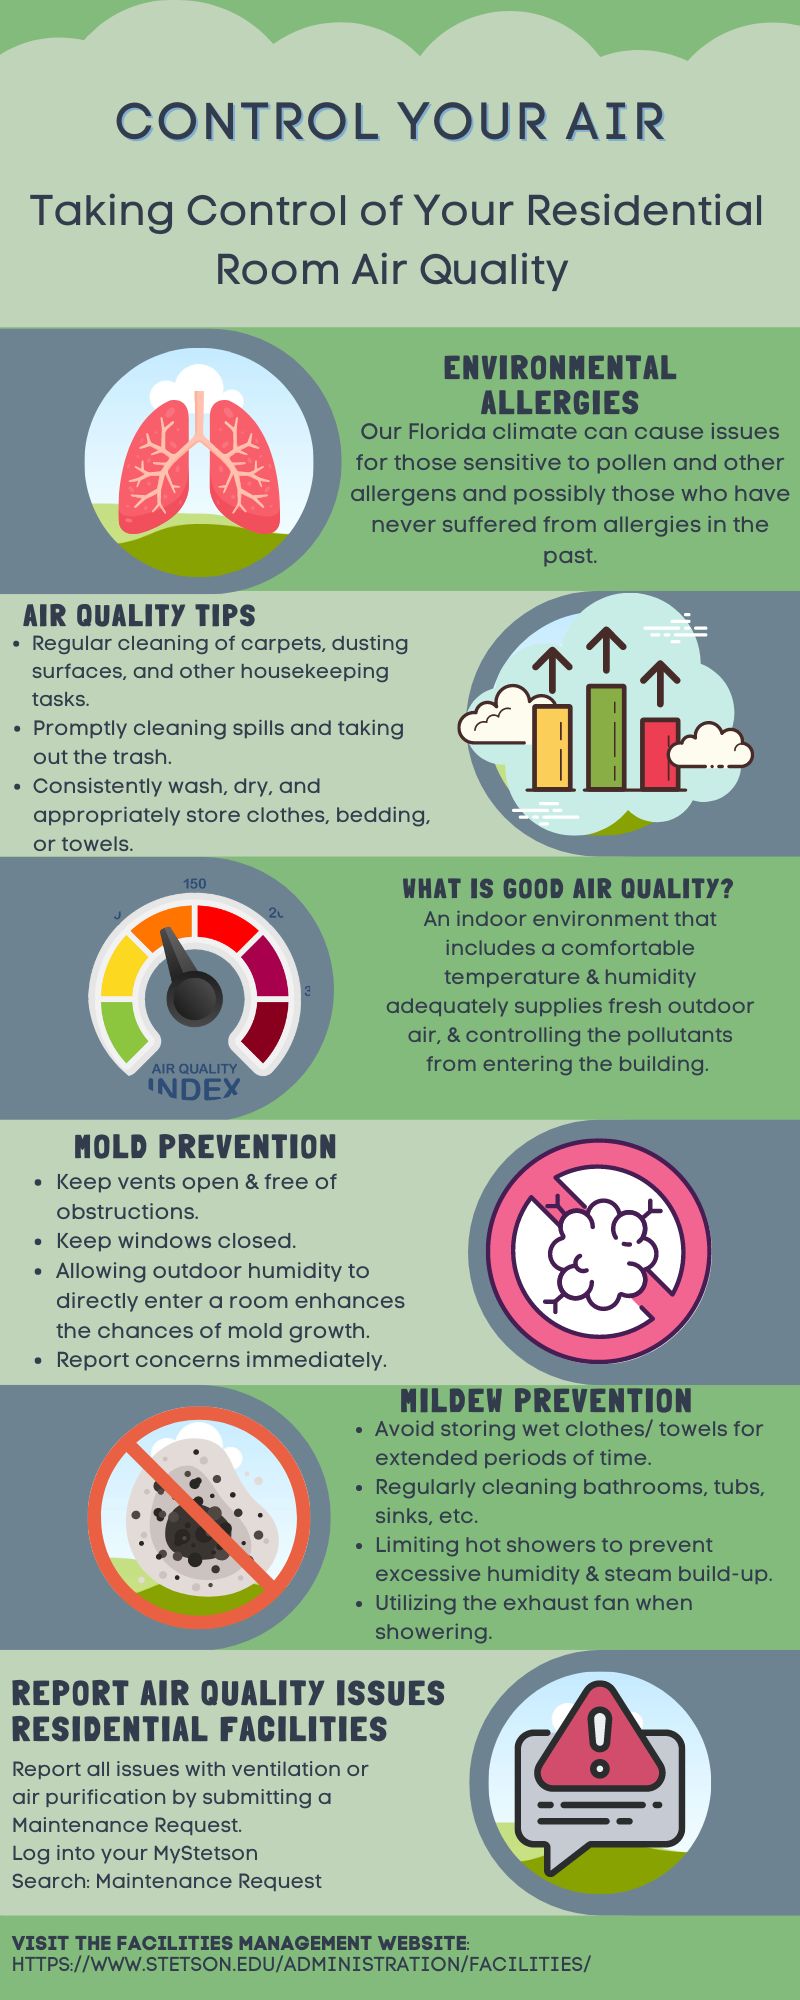 Control Your Air Educational Infographic